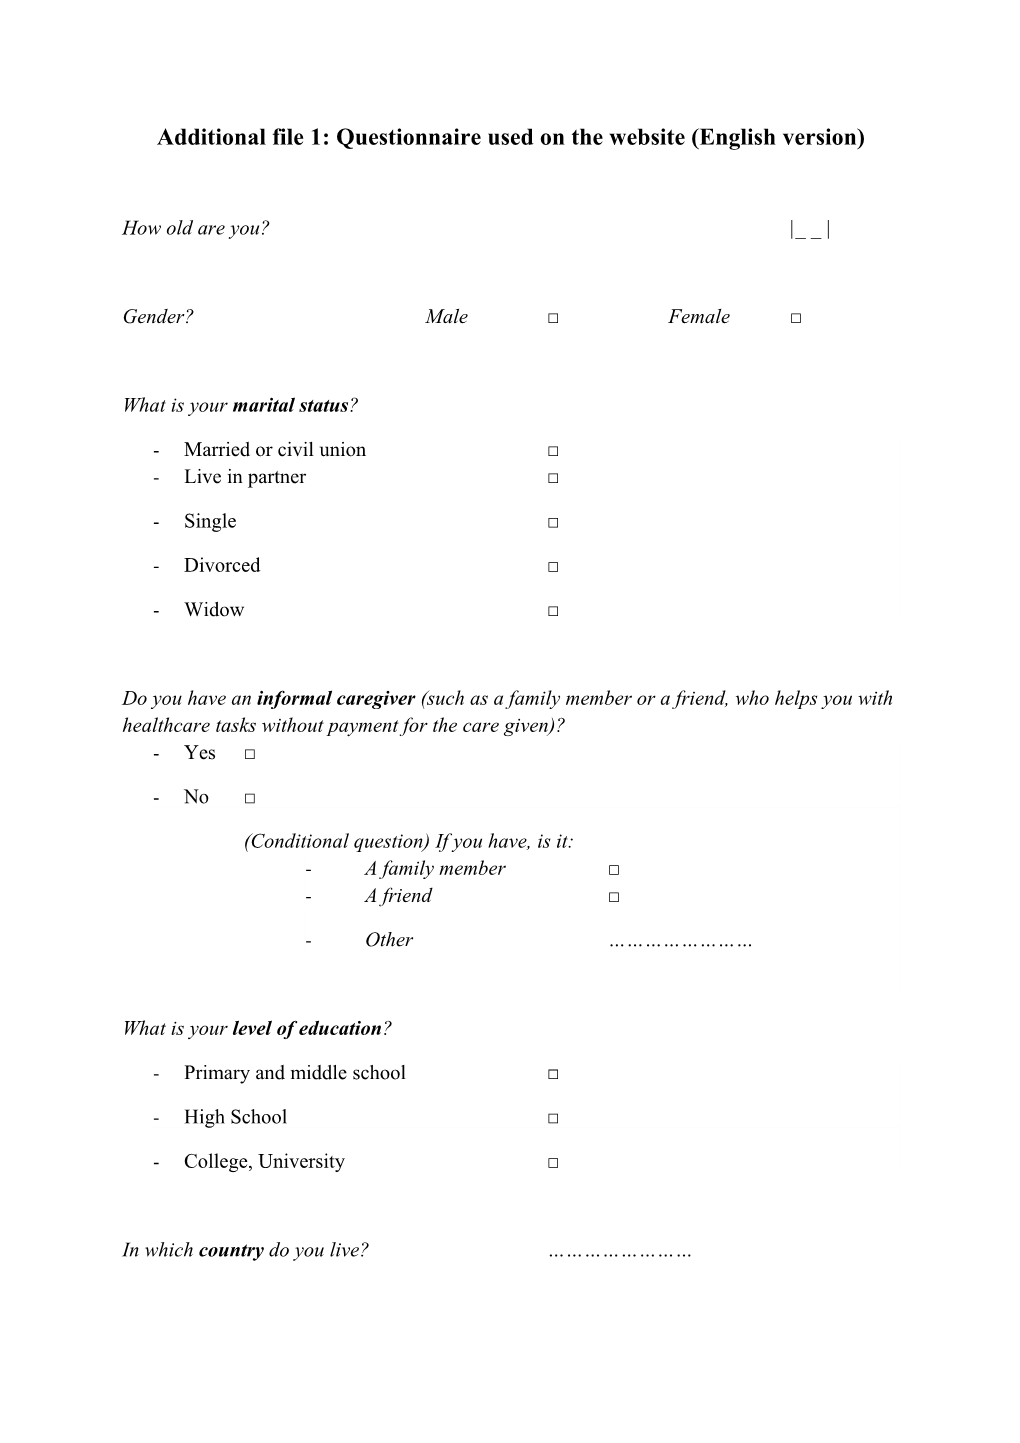 Additional File 1 : Questionnaire Used on the Website (English Version)